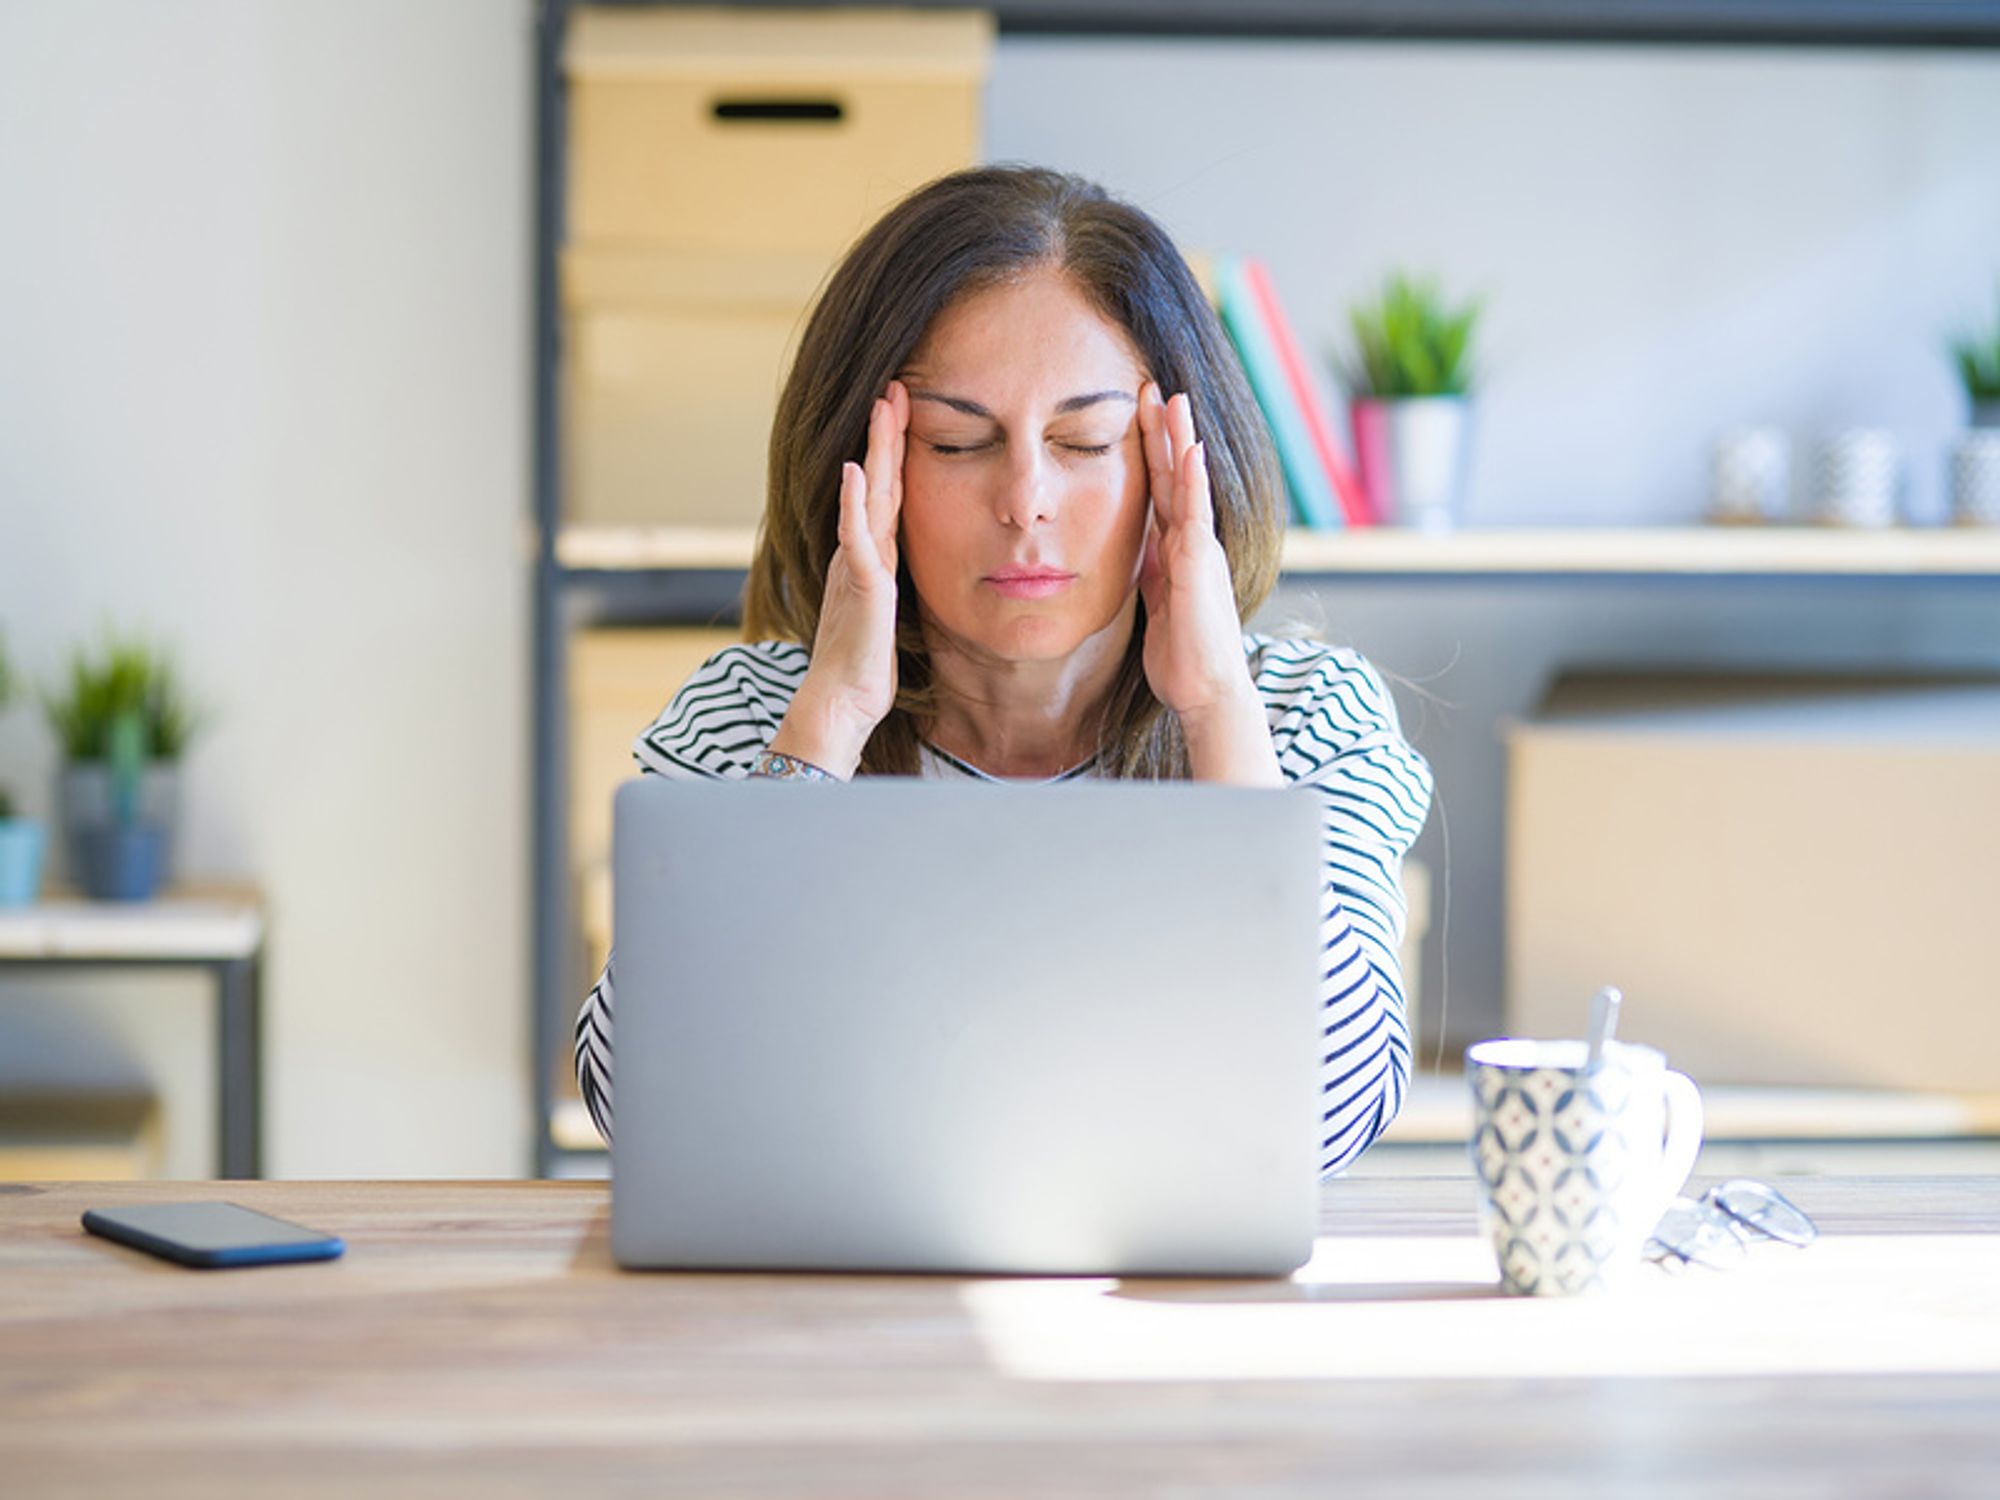 Professional woman sitting at table and working on computer, looking frustrated after receiving a work email with a passive aggressive phrase in it.